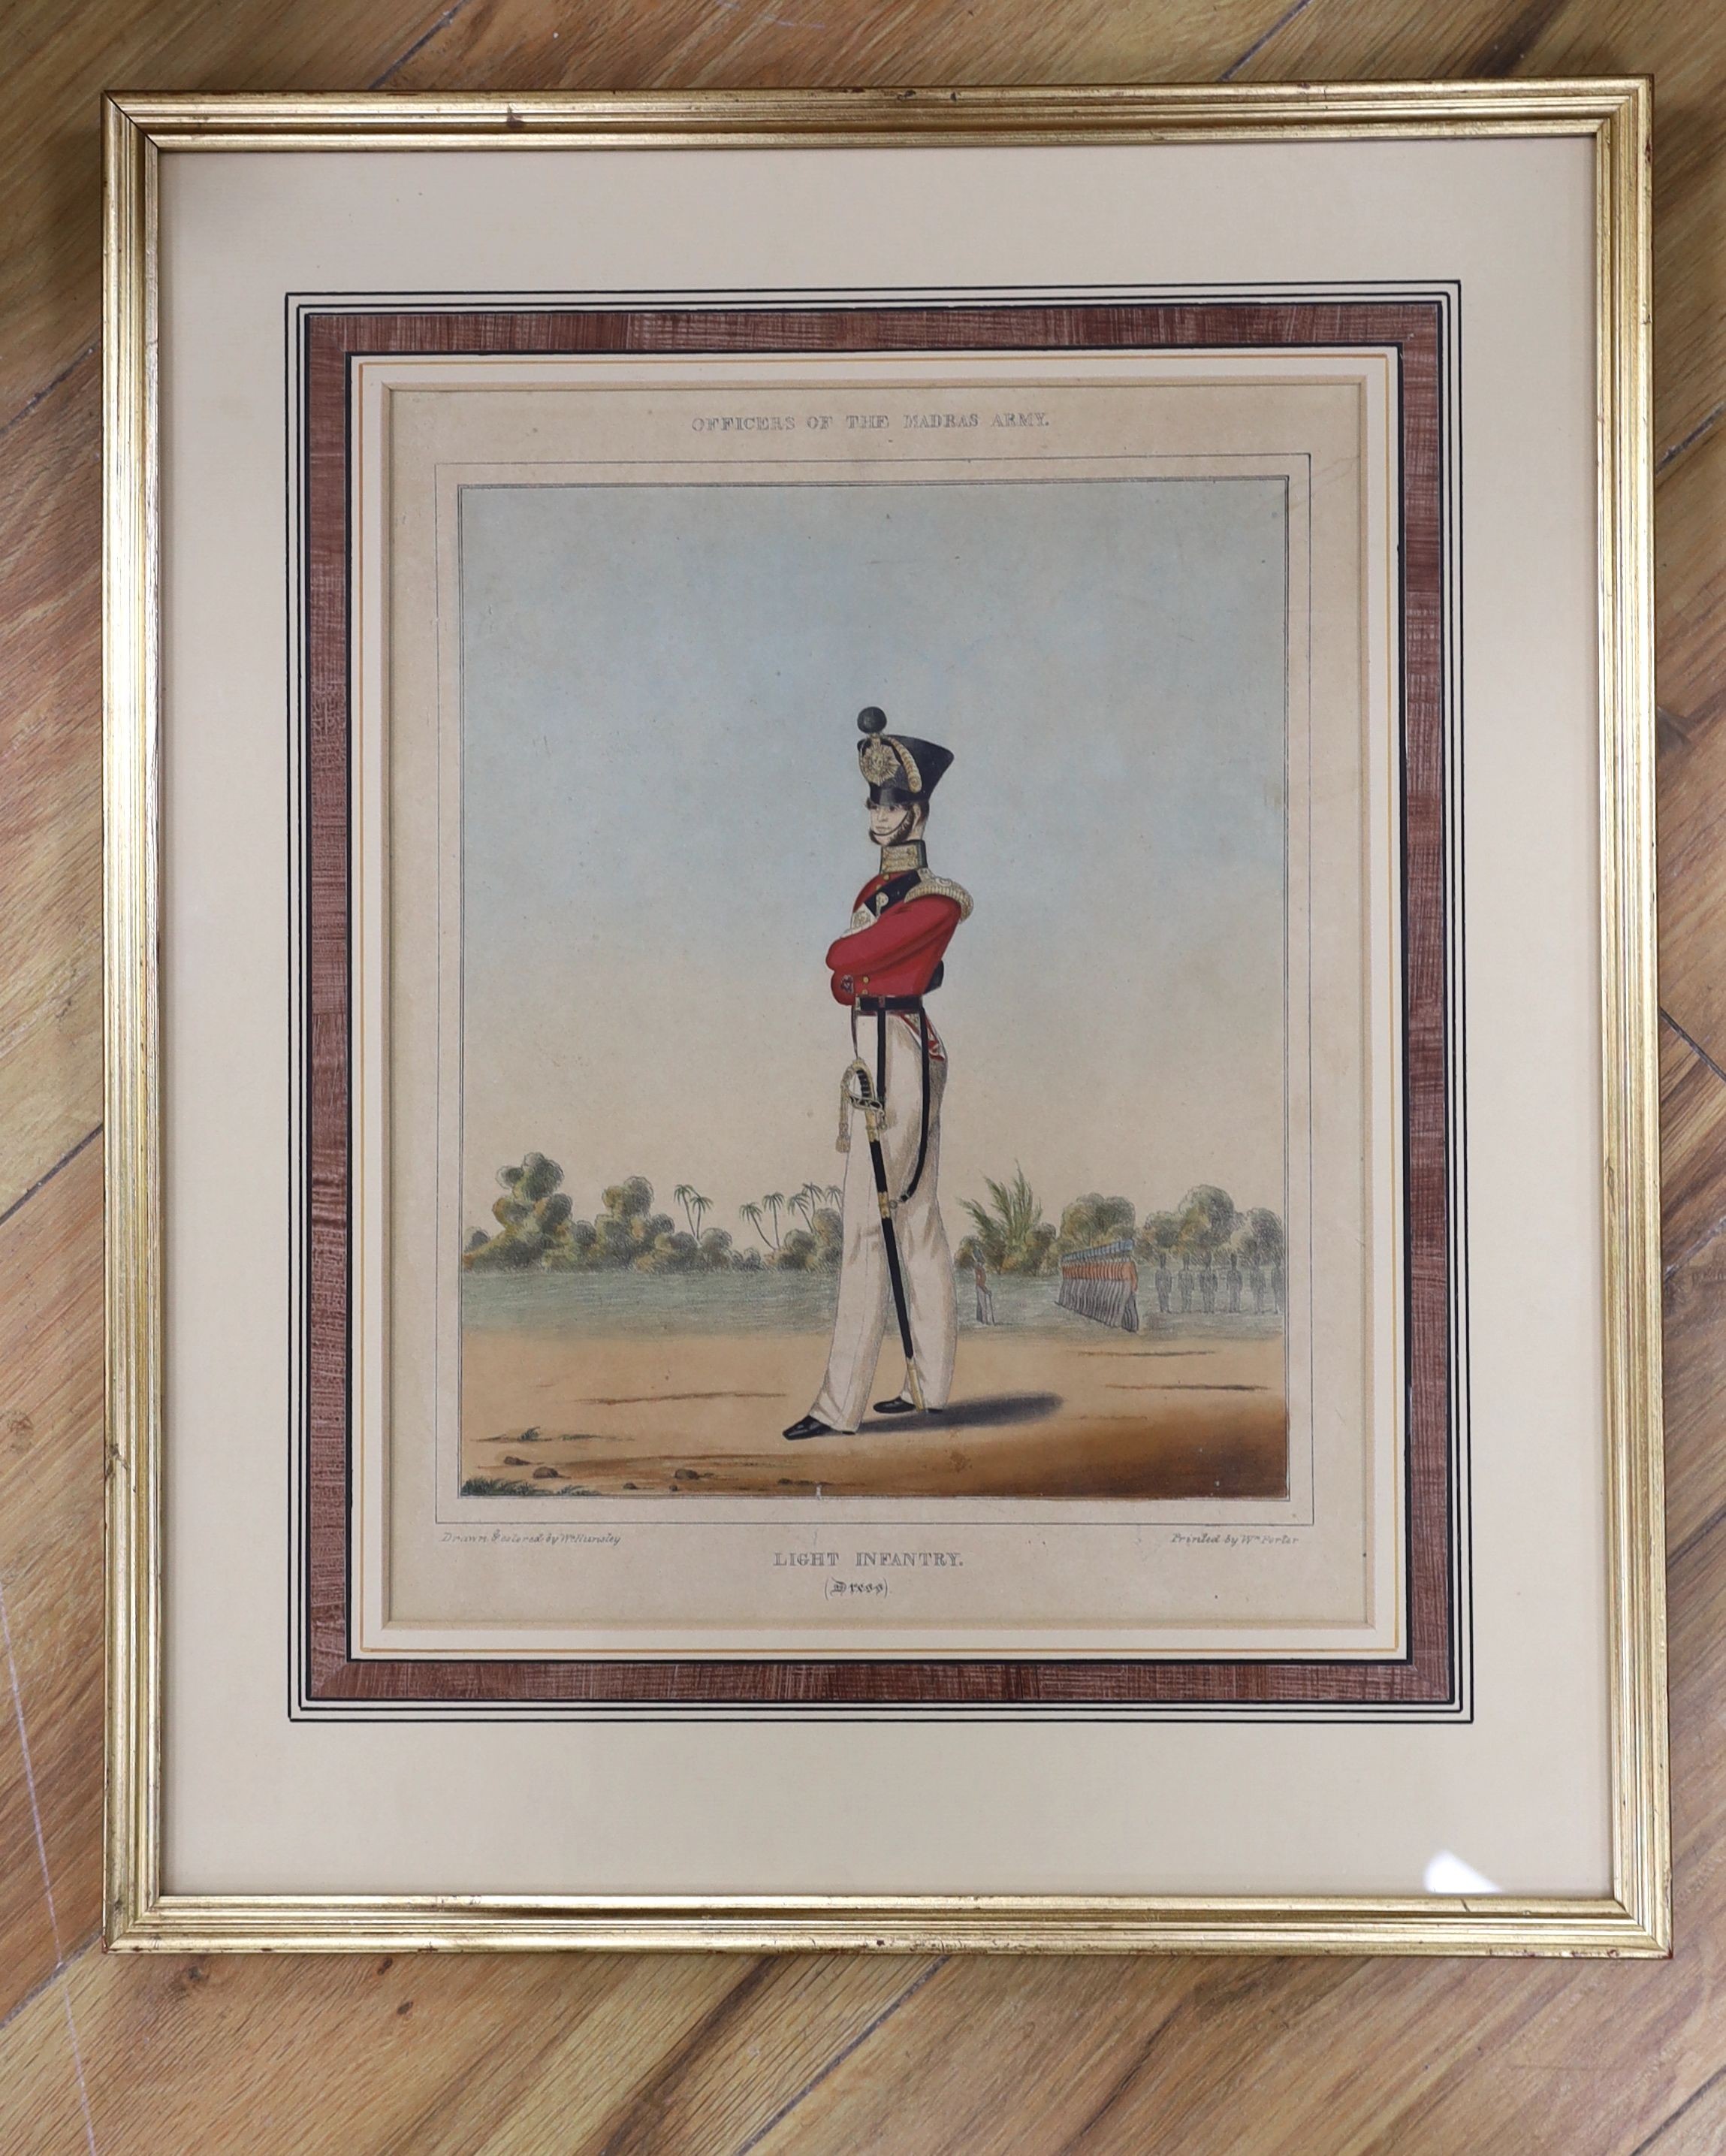 Porter after Hunsley, coloured lithograph, Officer's of The Madras Army, Light Infantry (dress), - Image 2 of 2